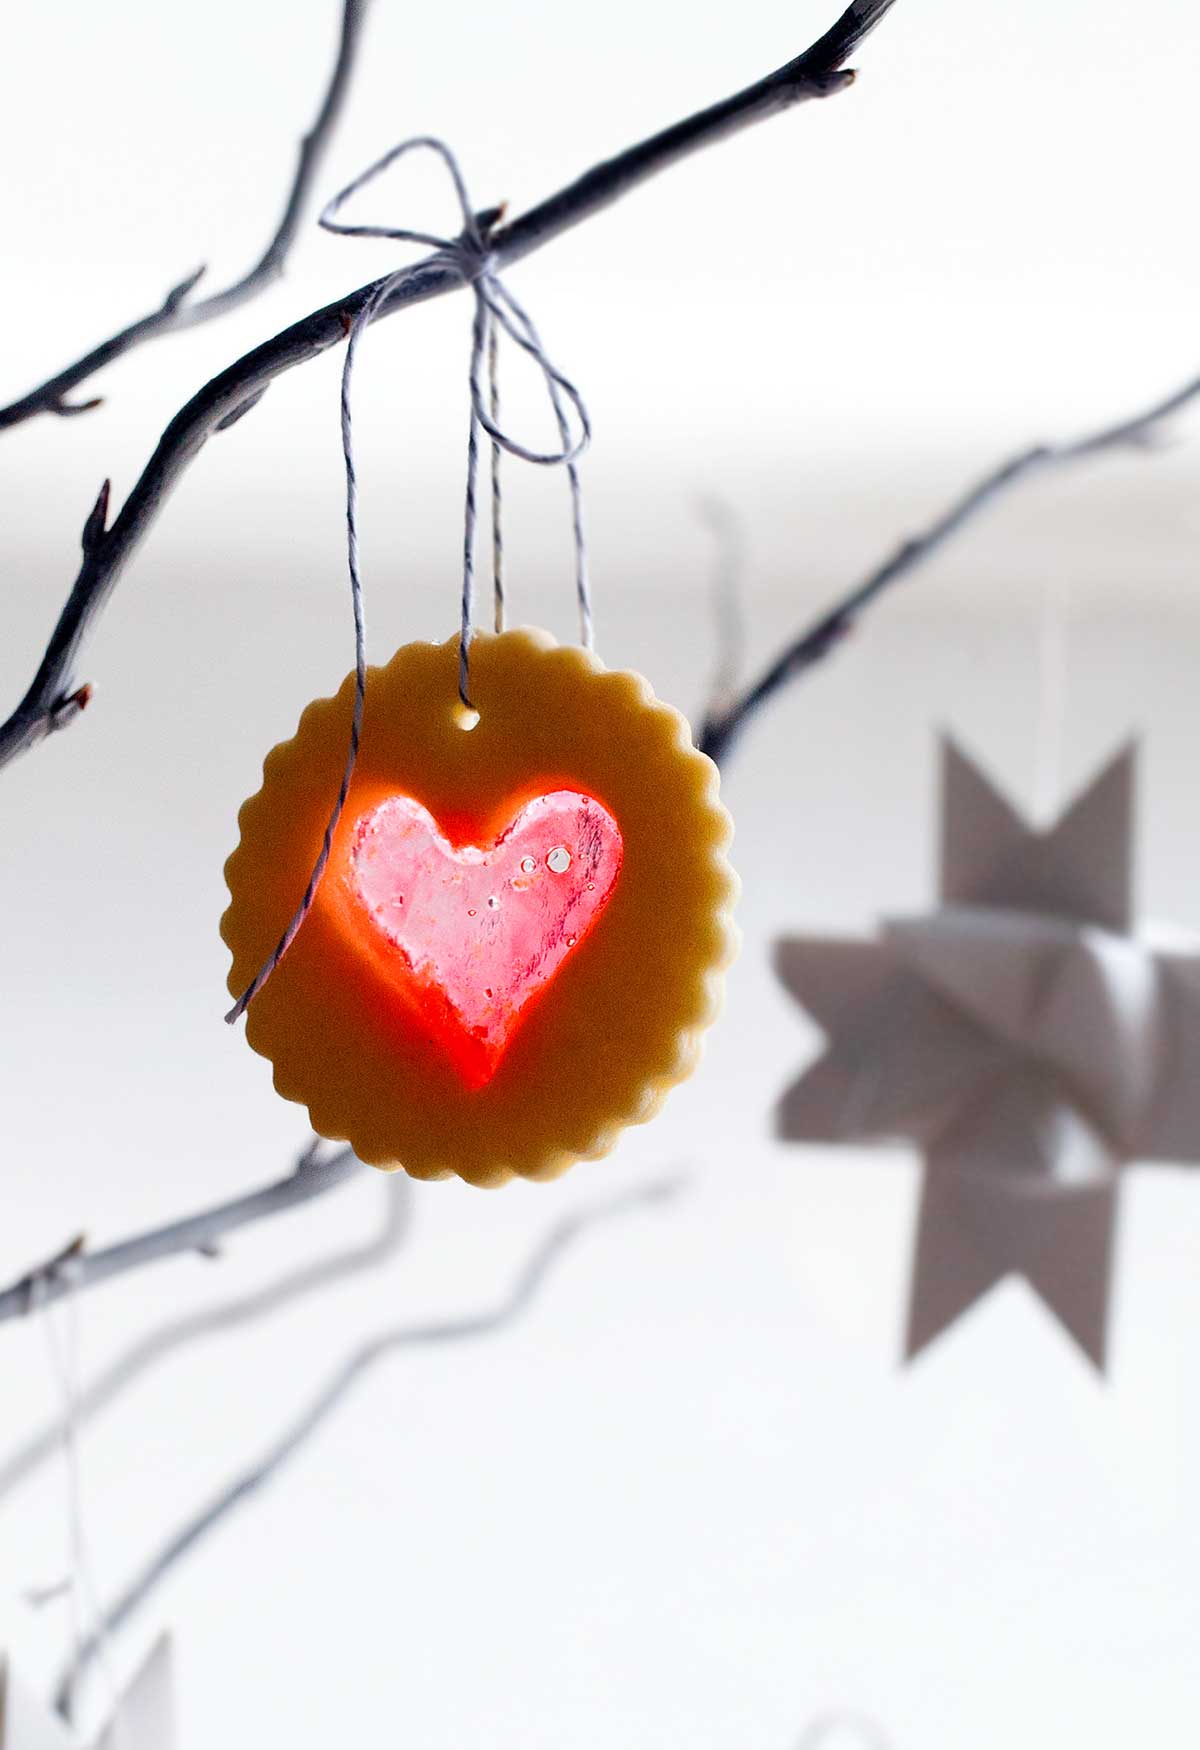 A scalloped round sugar cookie with a heart-shaped windowpane cutout hanging form a tree branch.